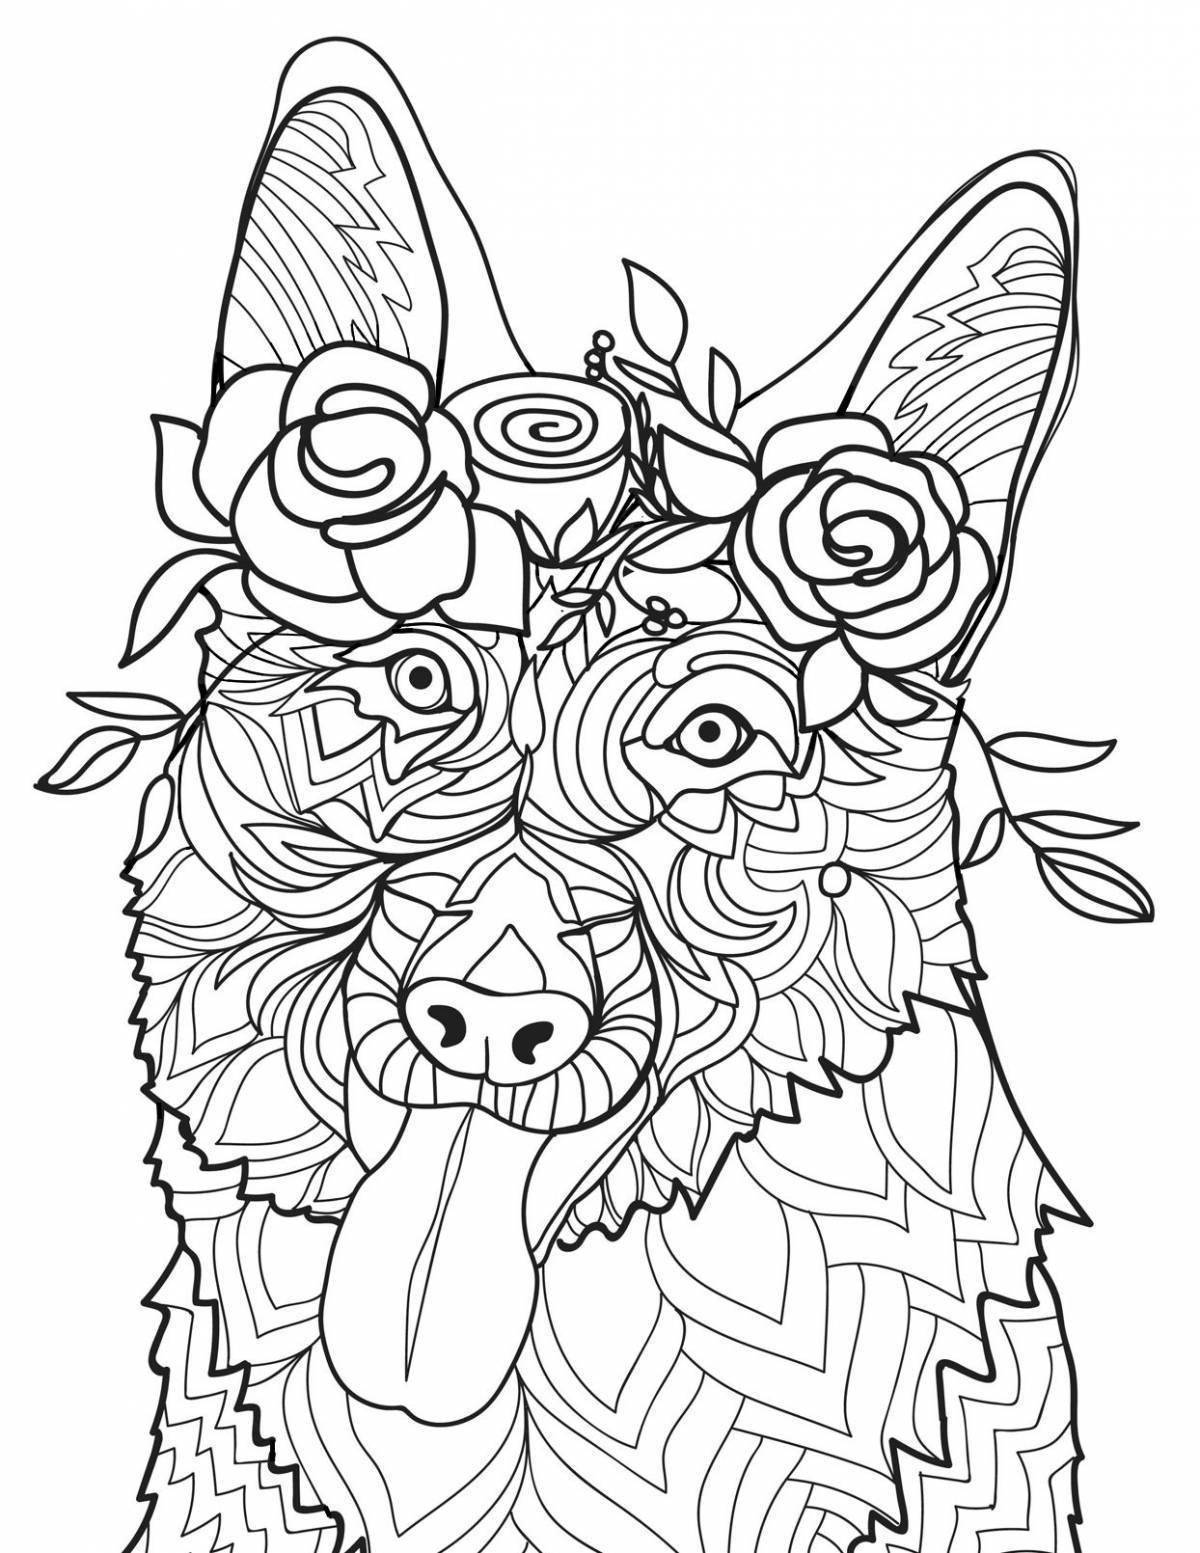 Coloring page adorable antistress dog